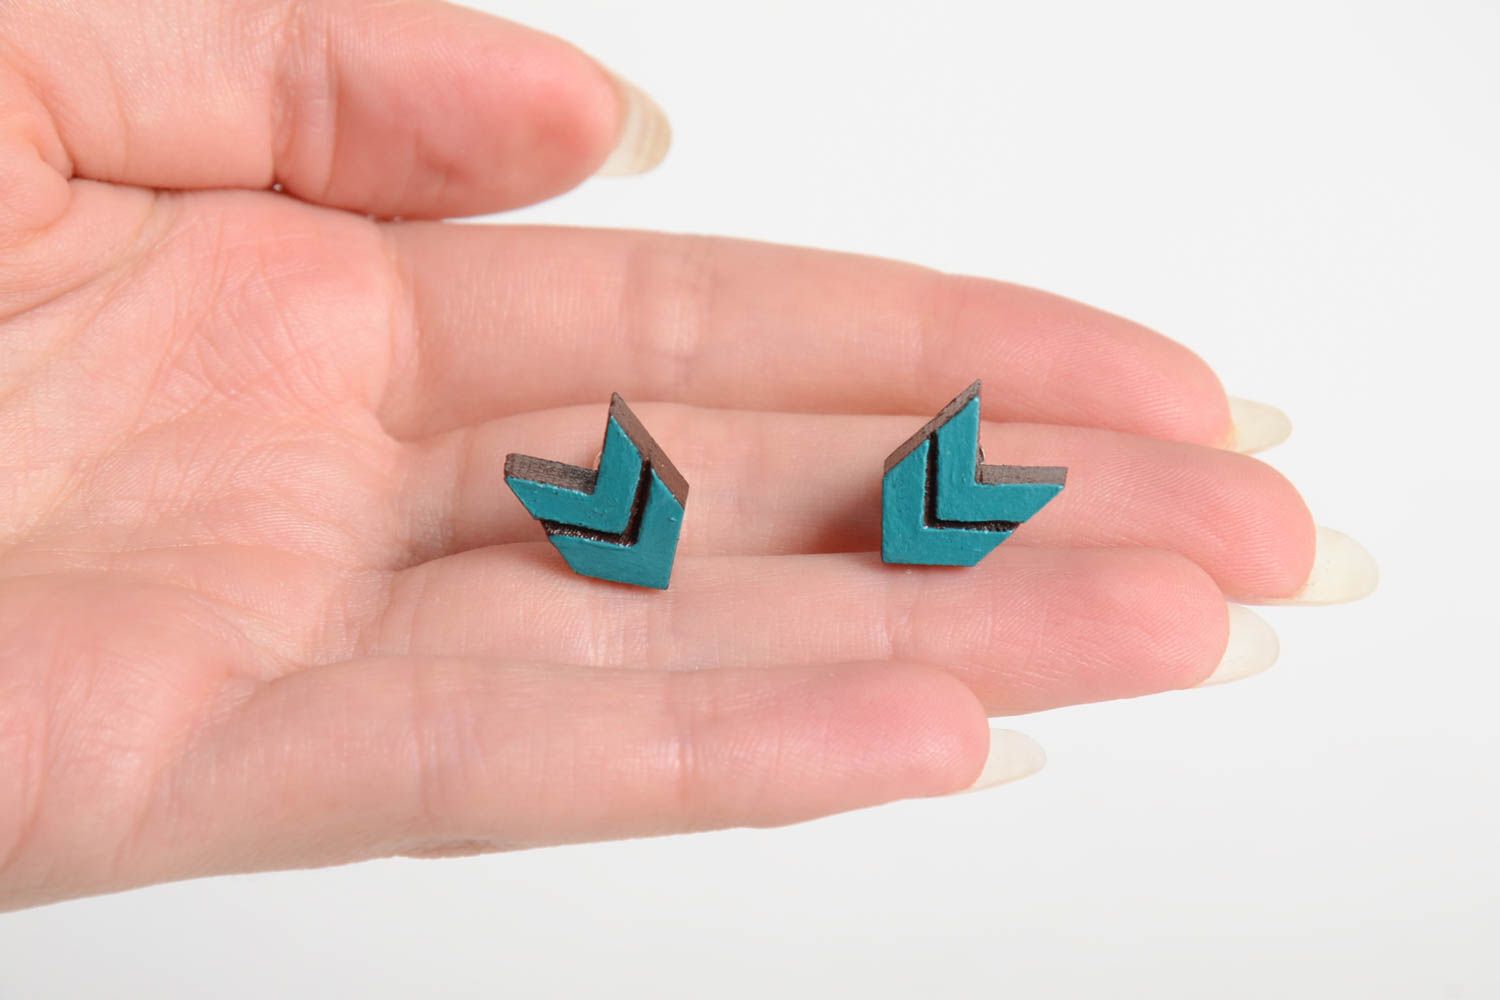 Stylish handmade wooden earrings stud earrings contemporary jewelry small gifts photo 2